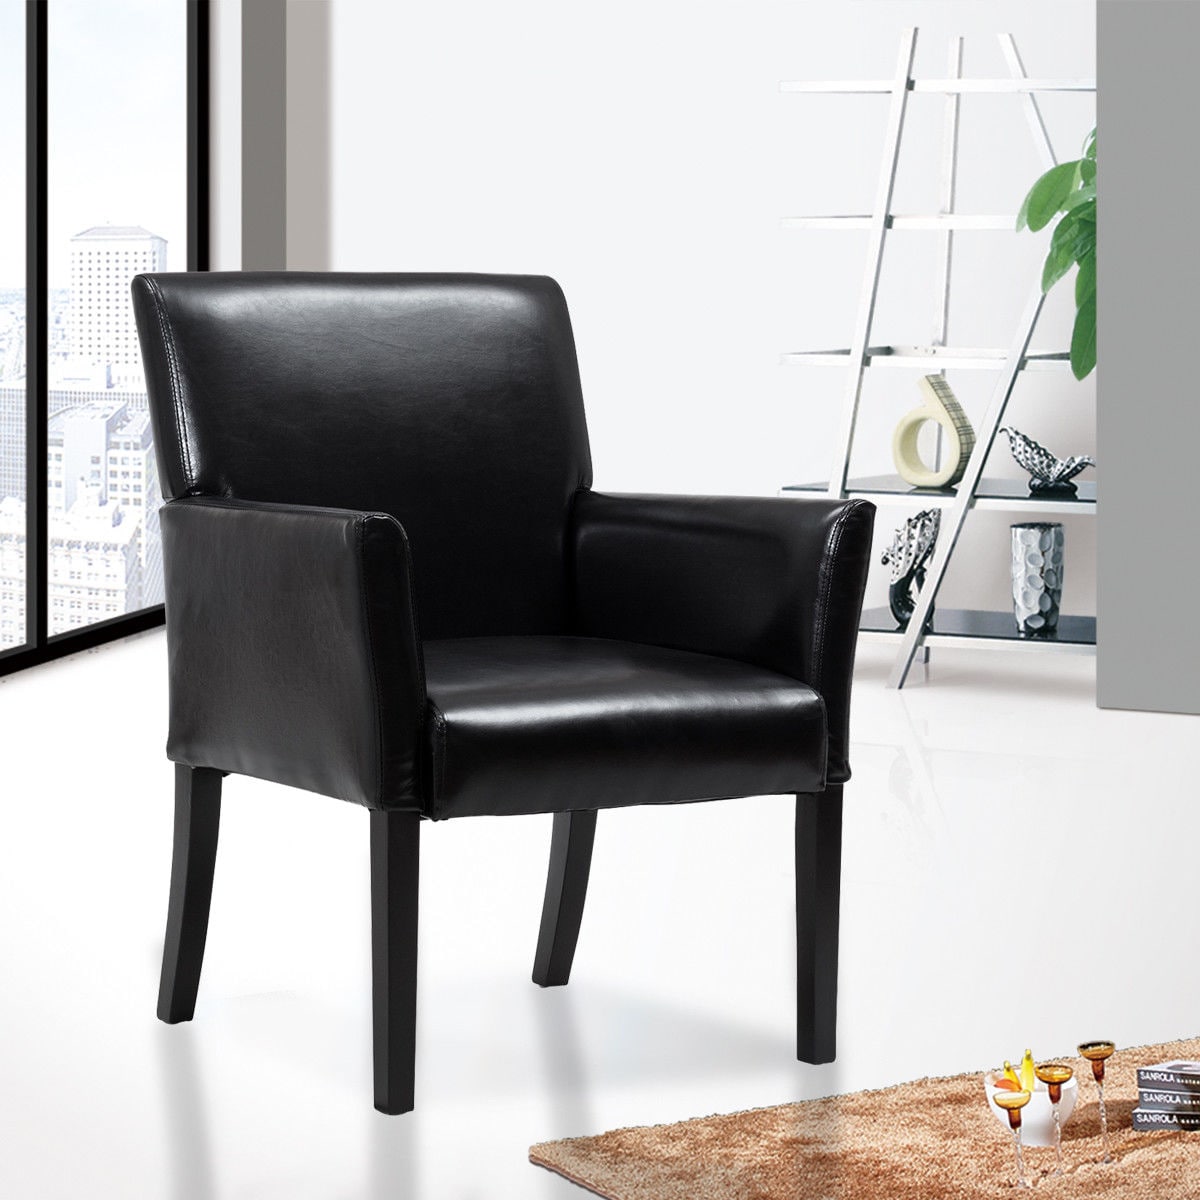 Black Faux Leather PU Tub Chair Armchair for Dining Living Room Office Reception 